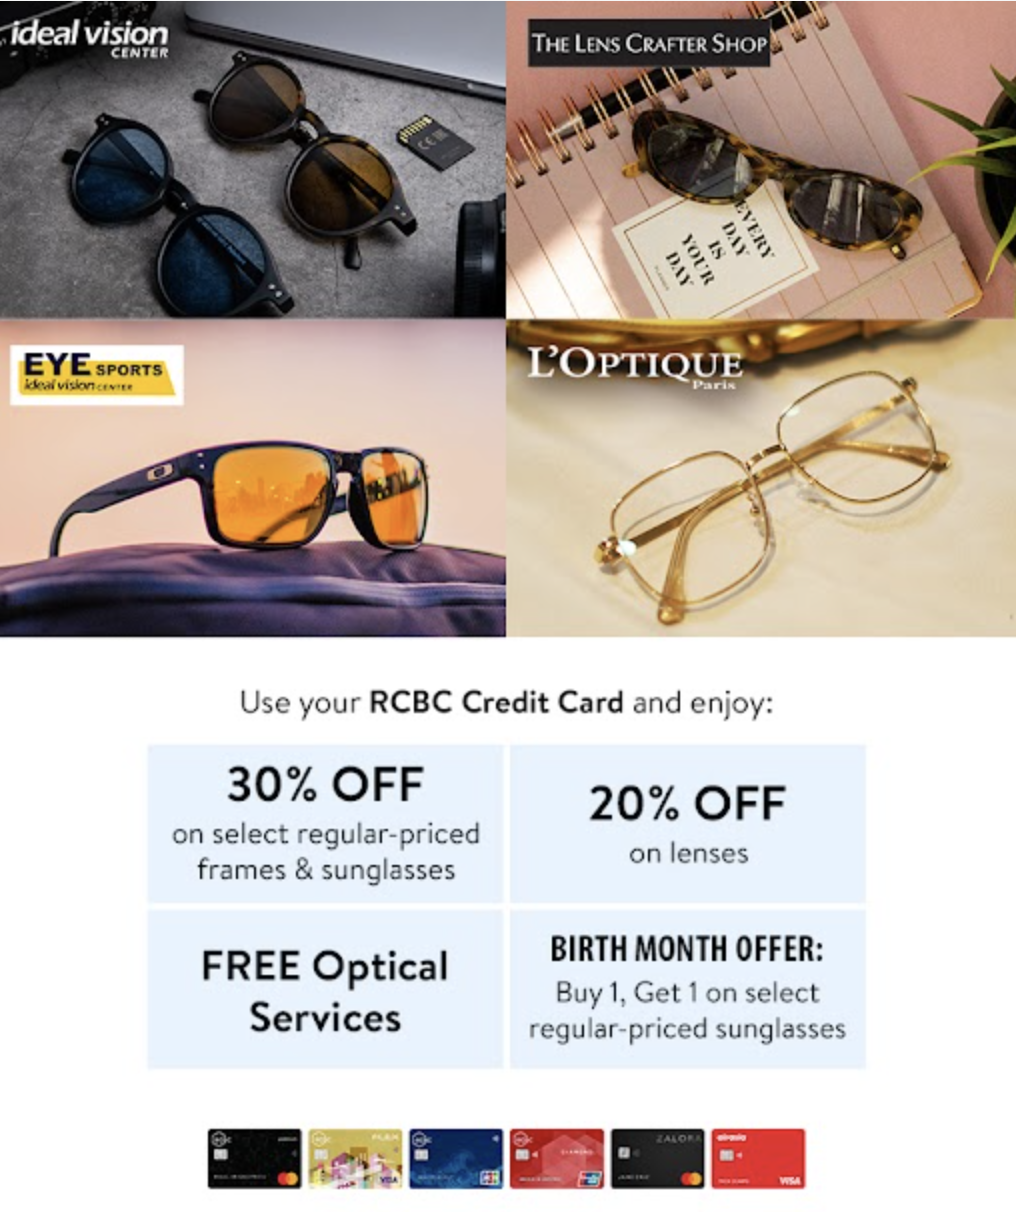 rcbc credit card promos - Up to 30% Discount at Ideal Vision Center